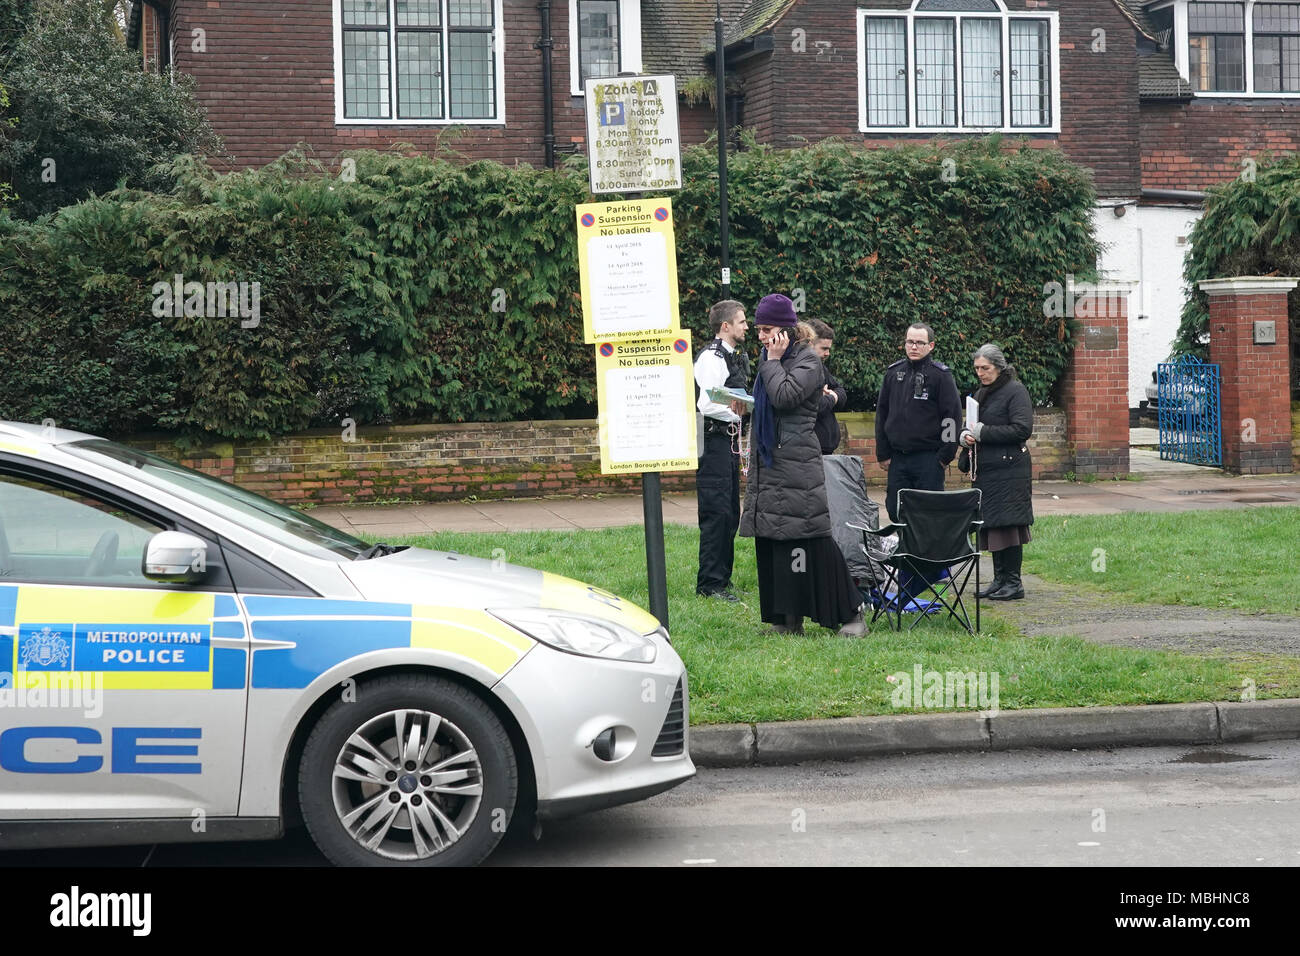 London, UIK. 11th April 2018. Police arrive at the Marie Stopes abortion clinic in Mattock Lane, Ealing, London, after Ealing Council's decision to impose a ban on protests outside the clinic. Photo date: Wednesday, April 11, 2018. Credit: Roger Garfield/Alamy Live News Stock Photo